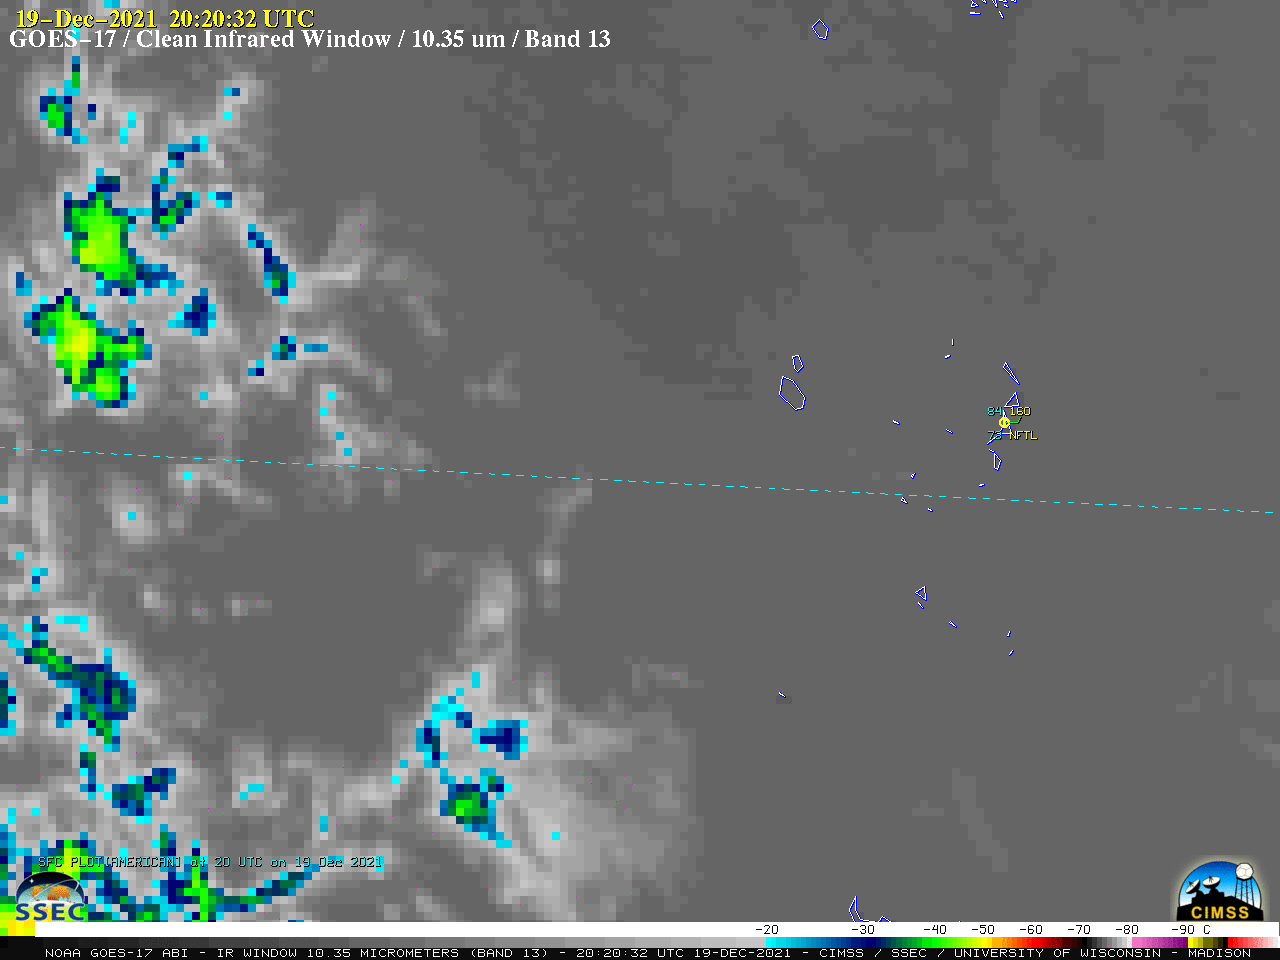 GOES-17 “Clean” Infrared Window (10.35 µm) images [click to play animated GIF